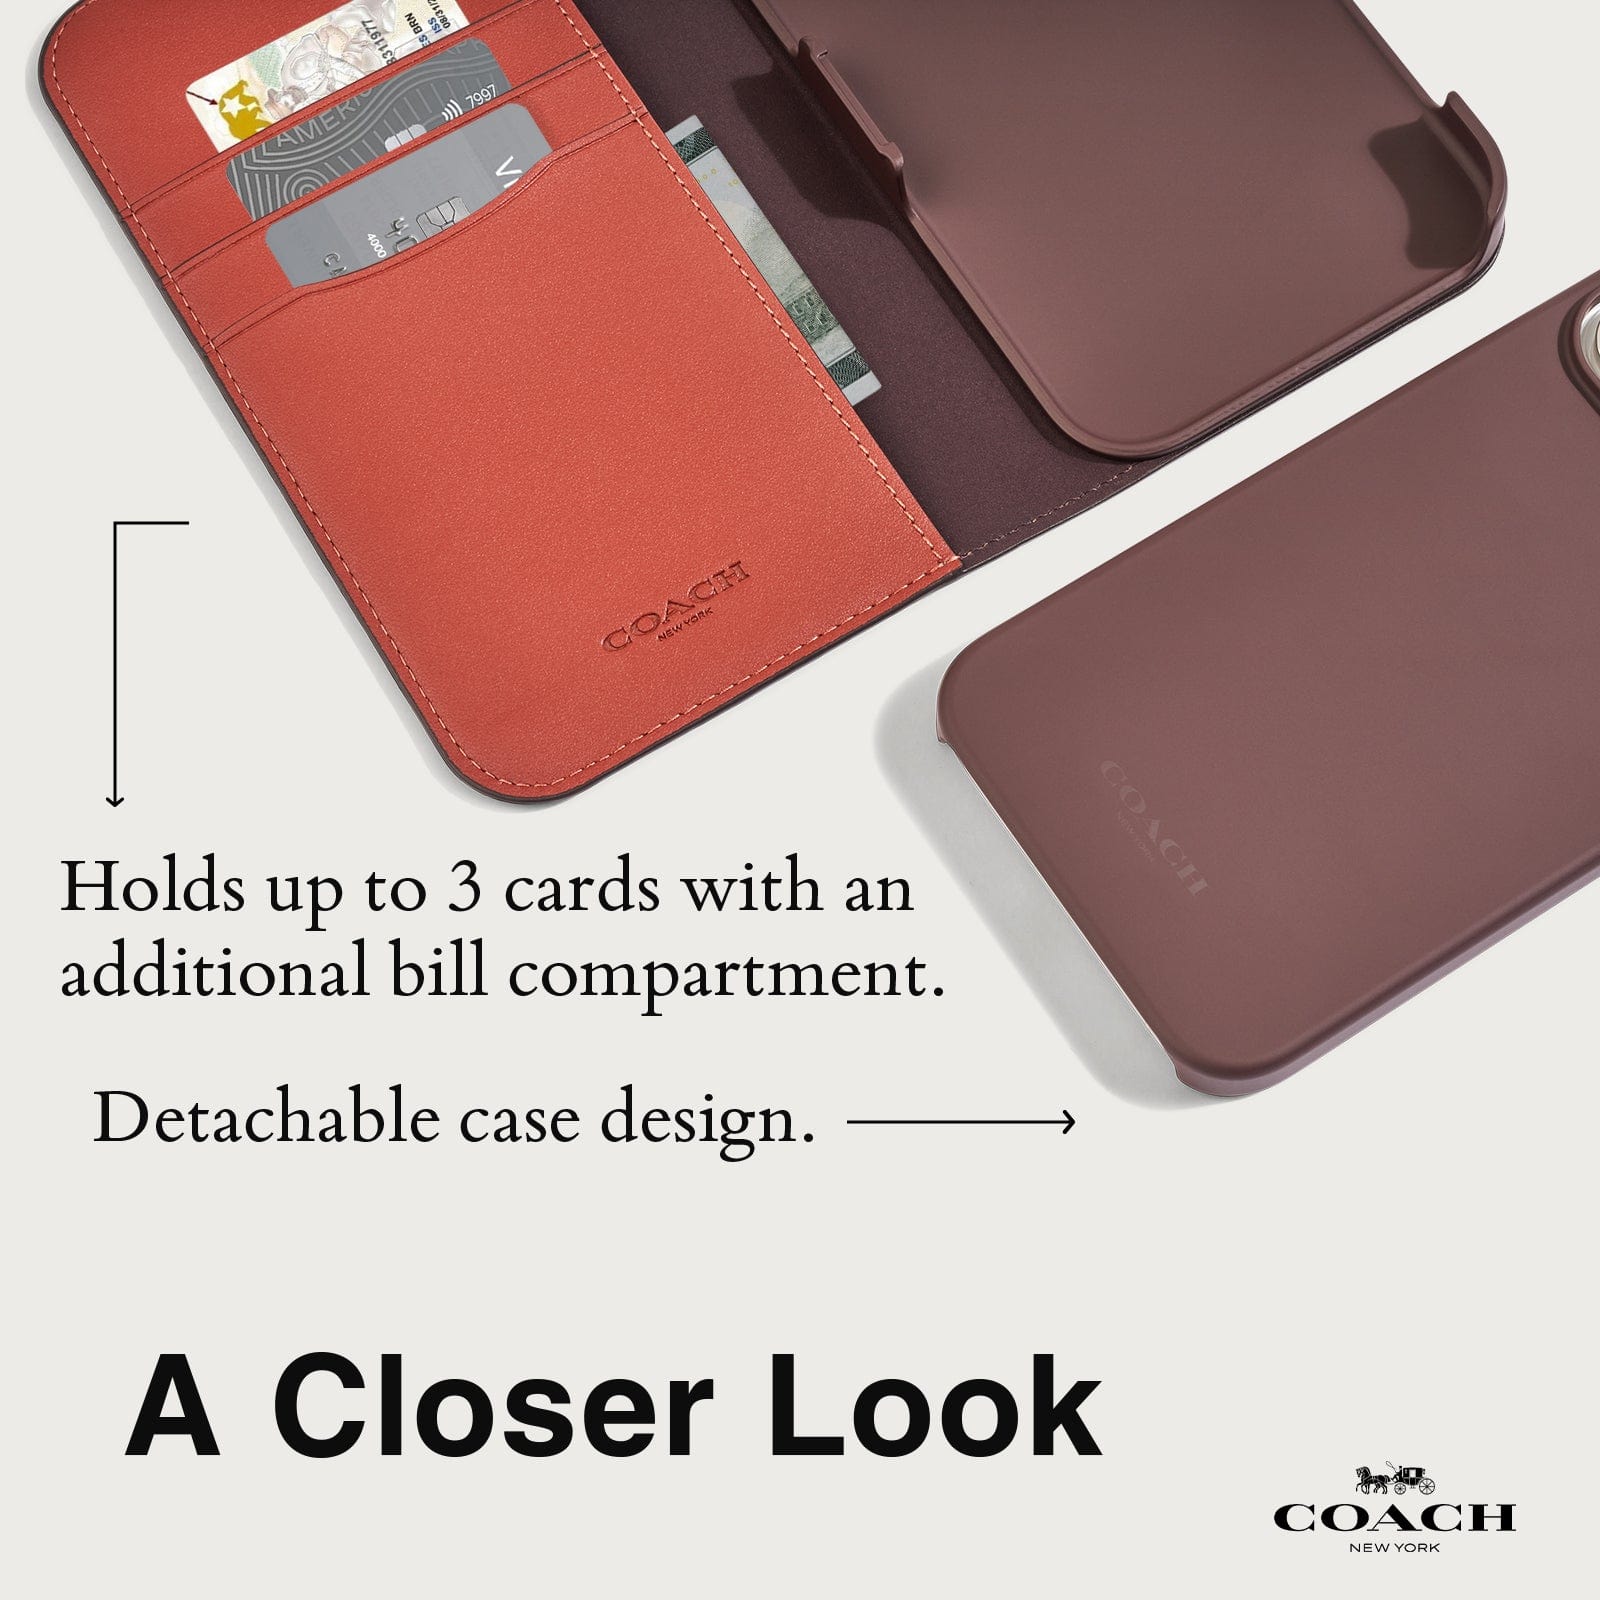 HOLDS UP TO 3 CARDS WITH AN ADDITIONAL BILL COMPARTMENT. DETACHABLE CASE DESIGN. A CLOSER LOOK.